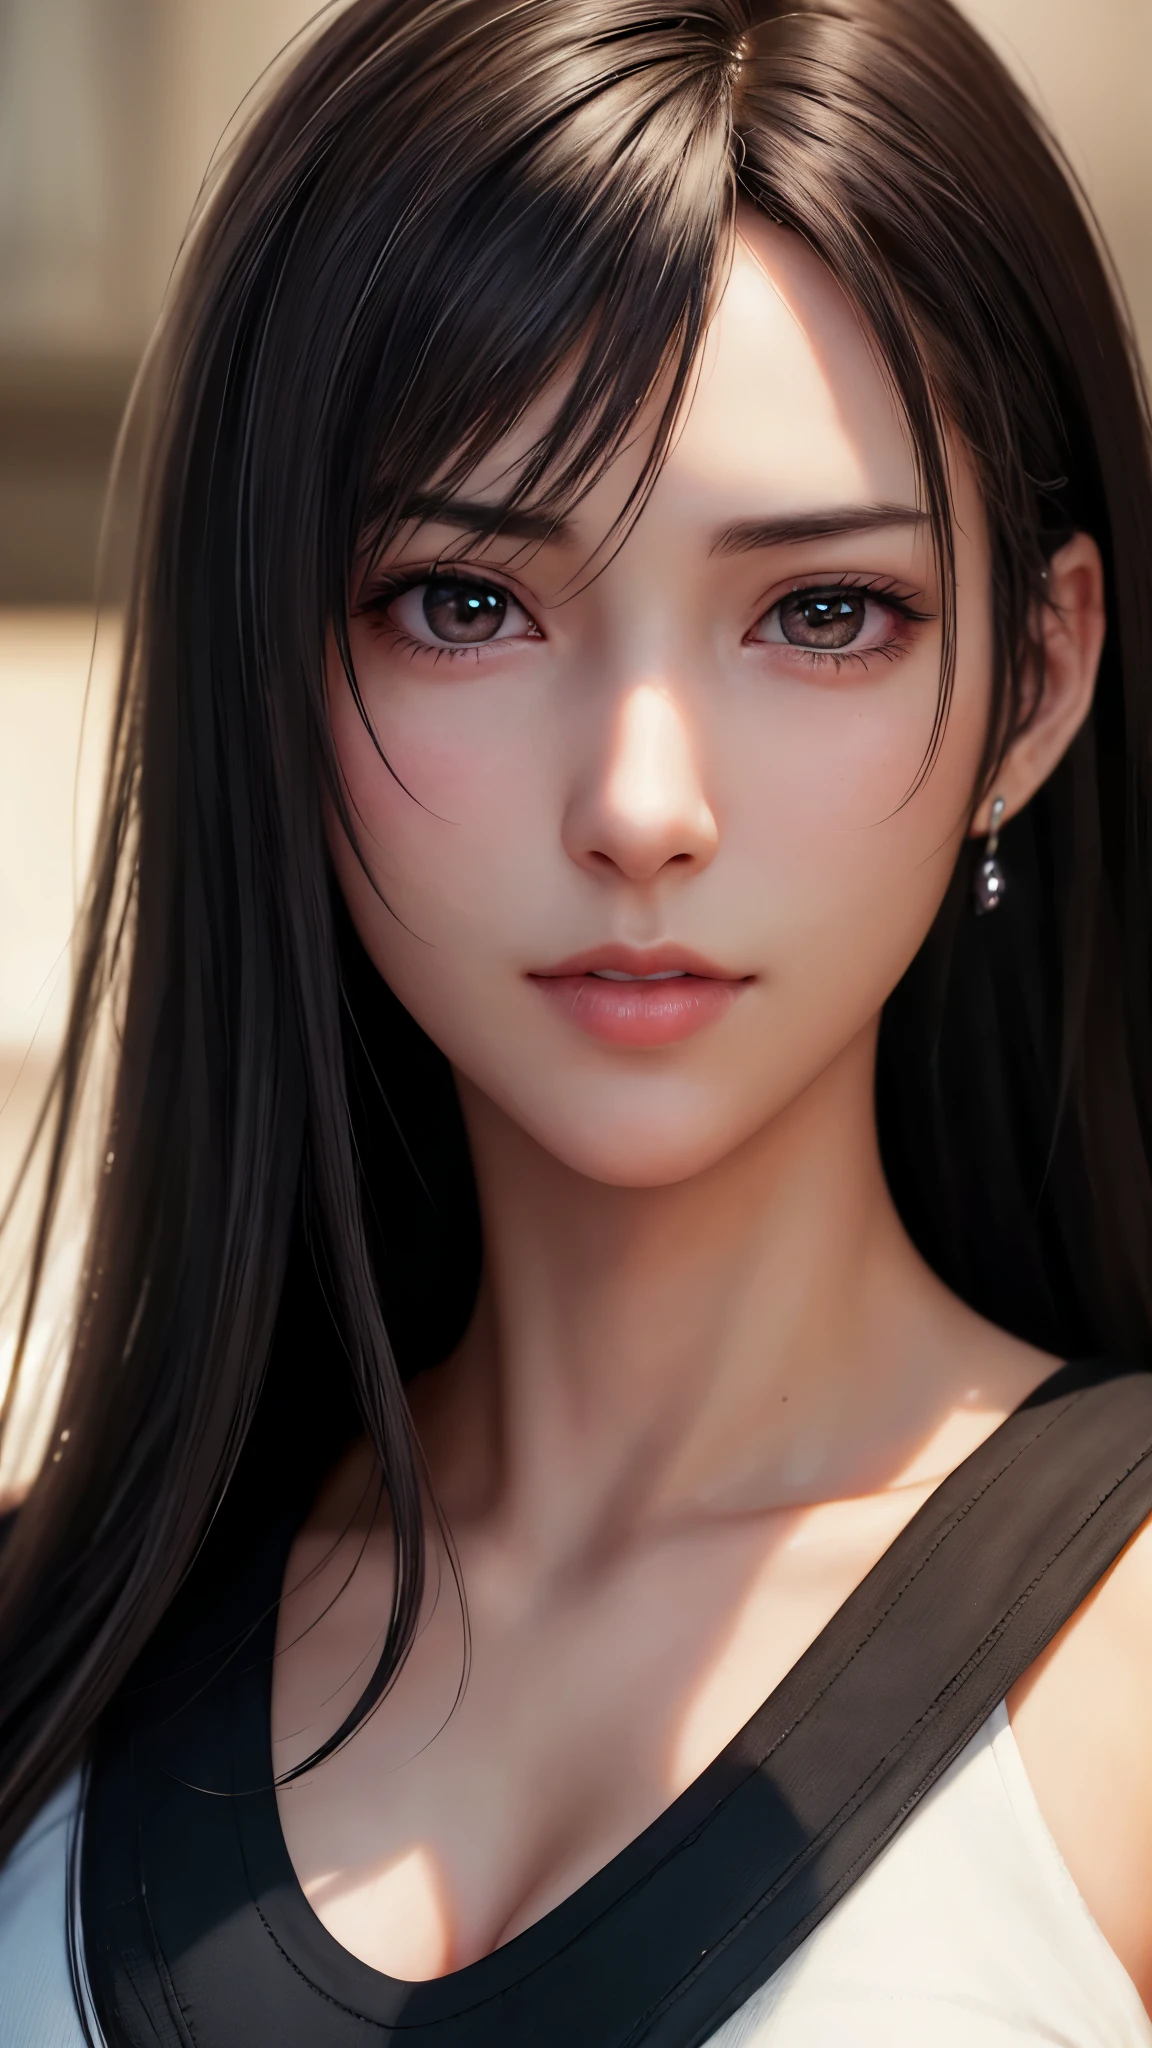 dressed, (Tifa),(photo realistic:1.4), (hyper realistic:1.4), (realistic:1.3),
(smoother lighting:1.05), (Improve the quality of cinematic lighting:0.9), 32K,
1 girl,20 year old girl, realistic lighting, Backlight, light shines on your face, ray tracing, (bright light:1.2), (Improvement of quality:1.4),
(Highest quality realistic textured skin:1.4), detailed eyes, detailed face, high quality eyes,
(Tired, sleepy and satisfied:0.0), close up of face, T-shirt,
(Enhance the mood of your body line:1.1), (Enhances the beauty of skin texture:1.1)
